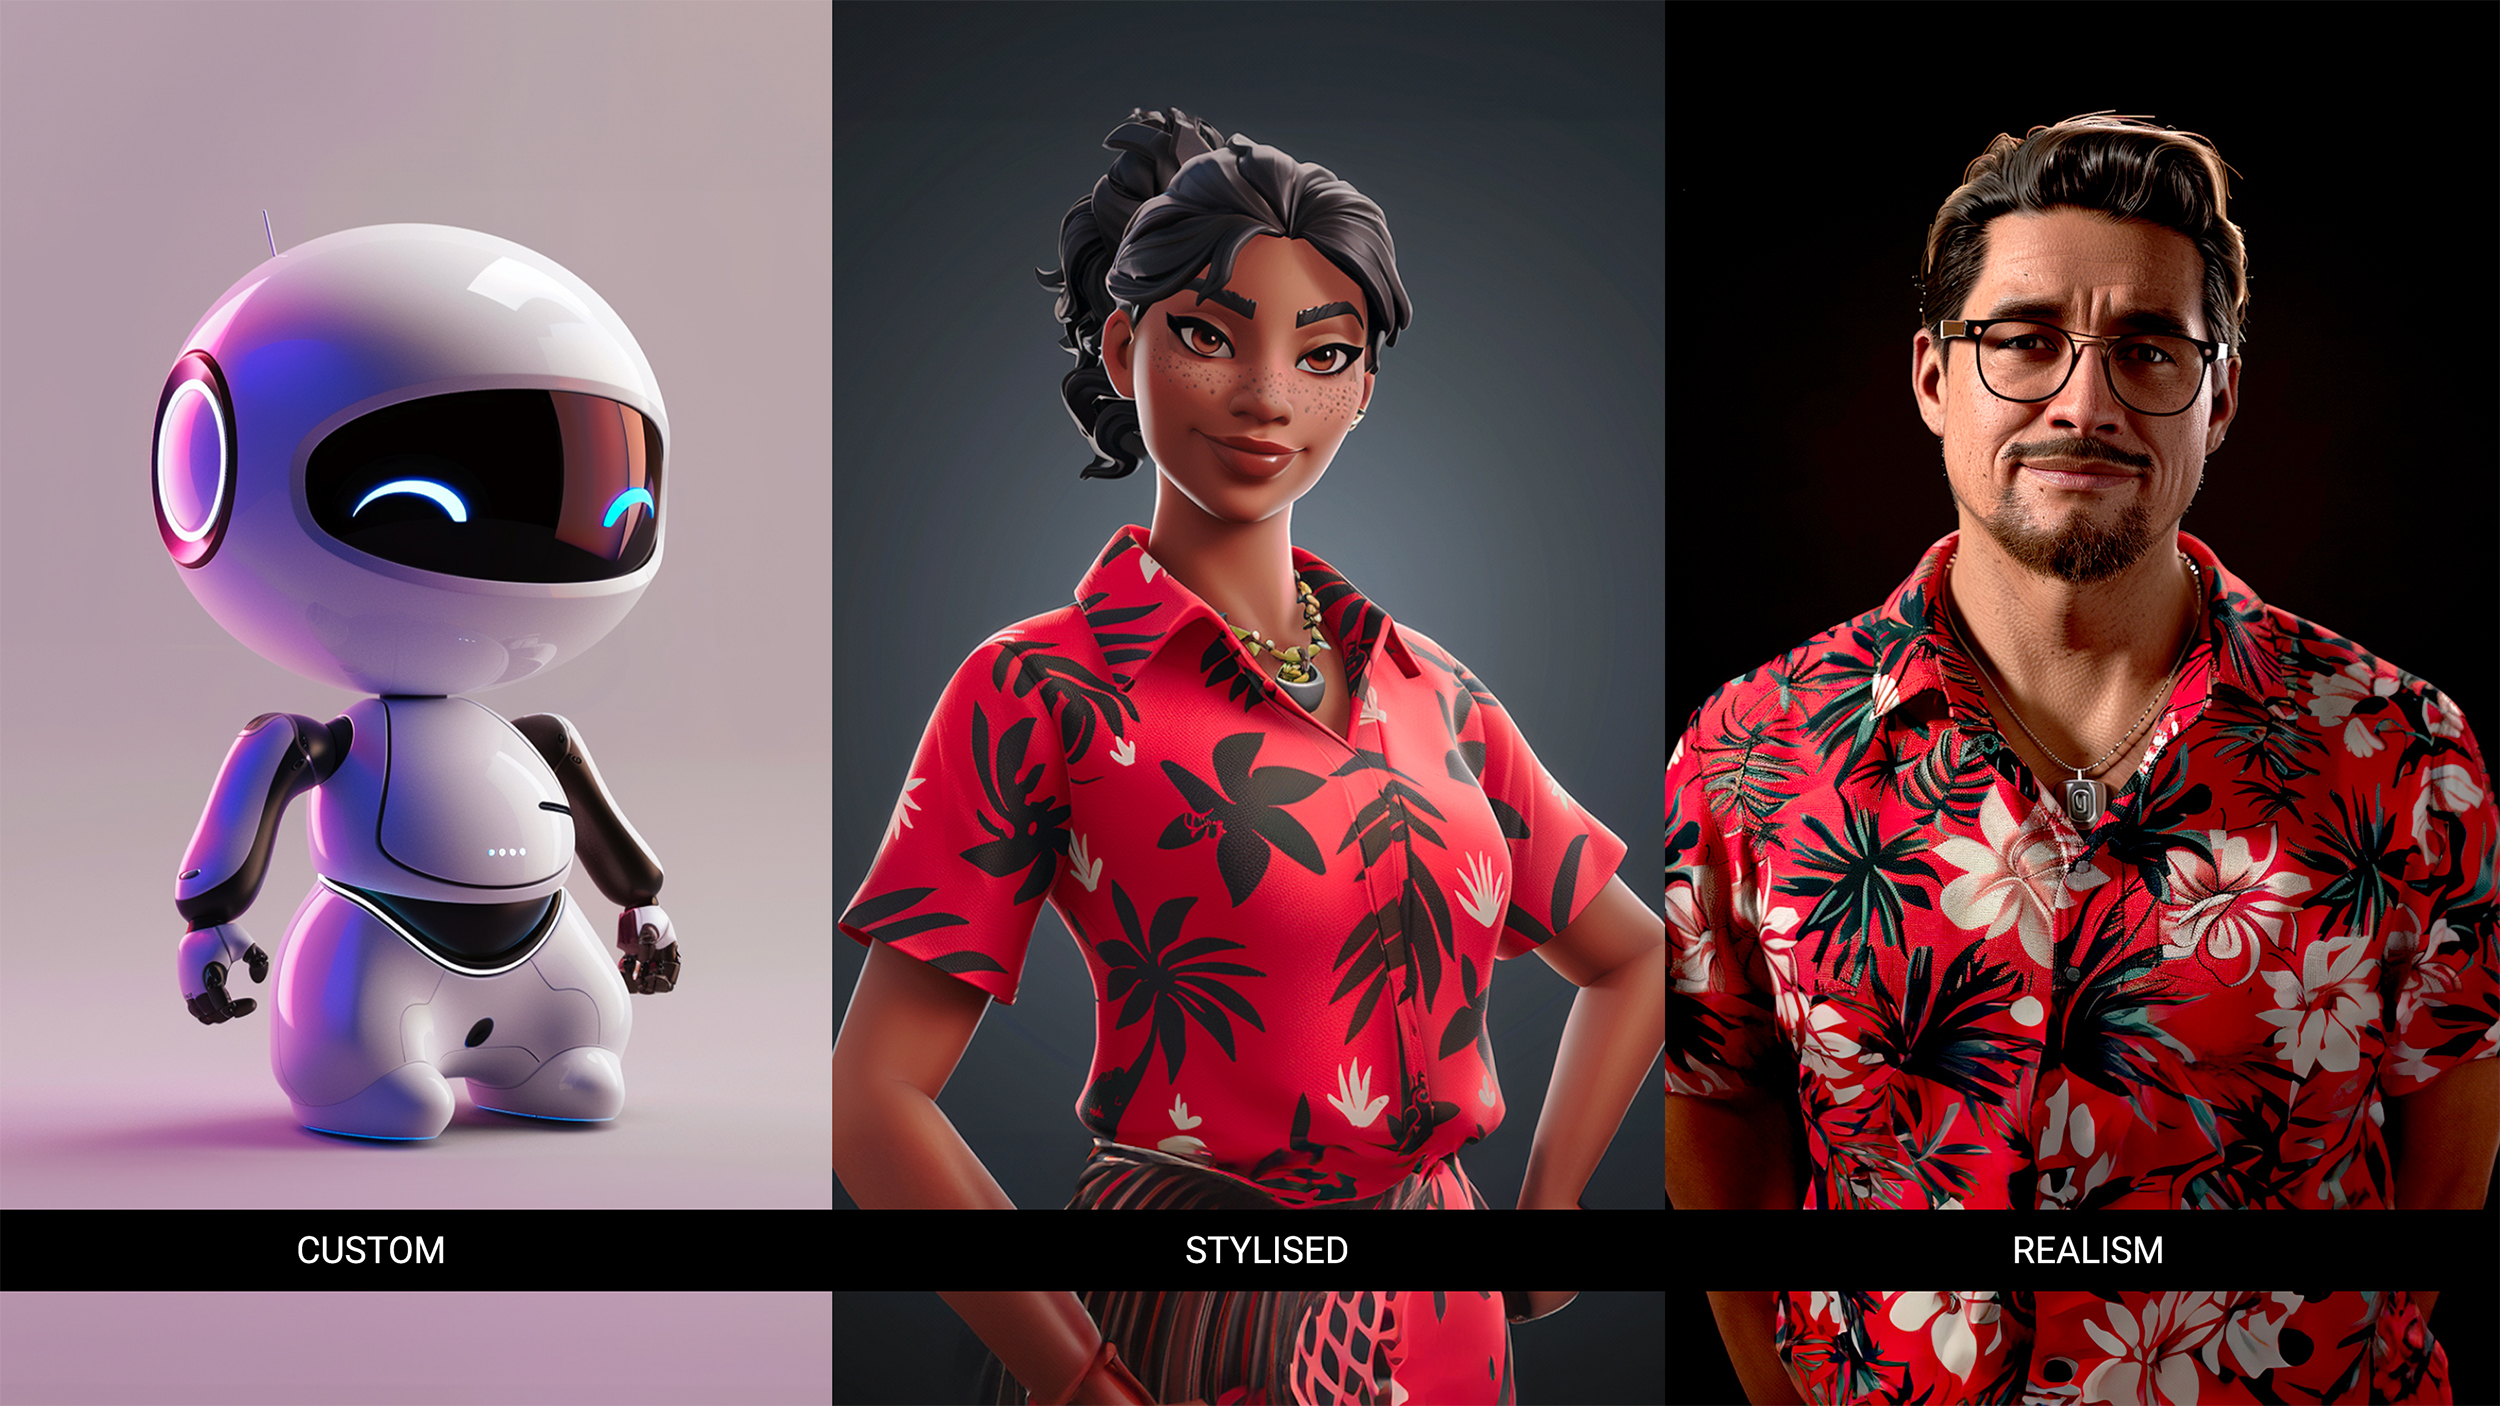 3 Different Style Types of AI Avatars